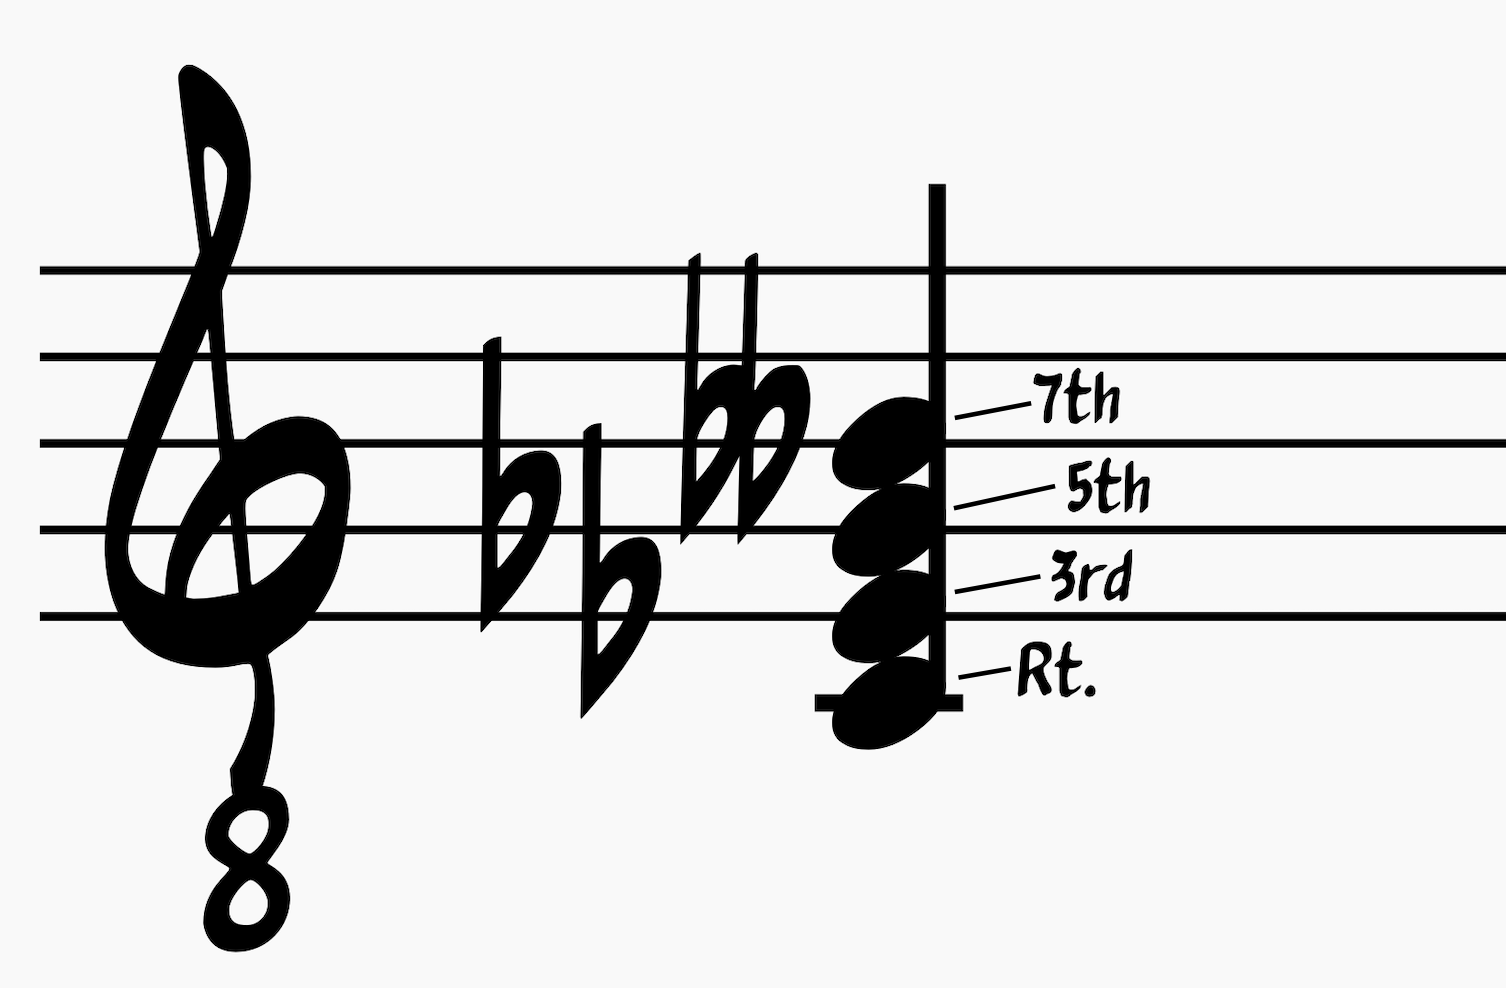 Jazz guitar chords: C fully diminished chord notated with root note, 3rd, 5th, and 7th shown